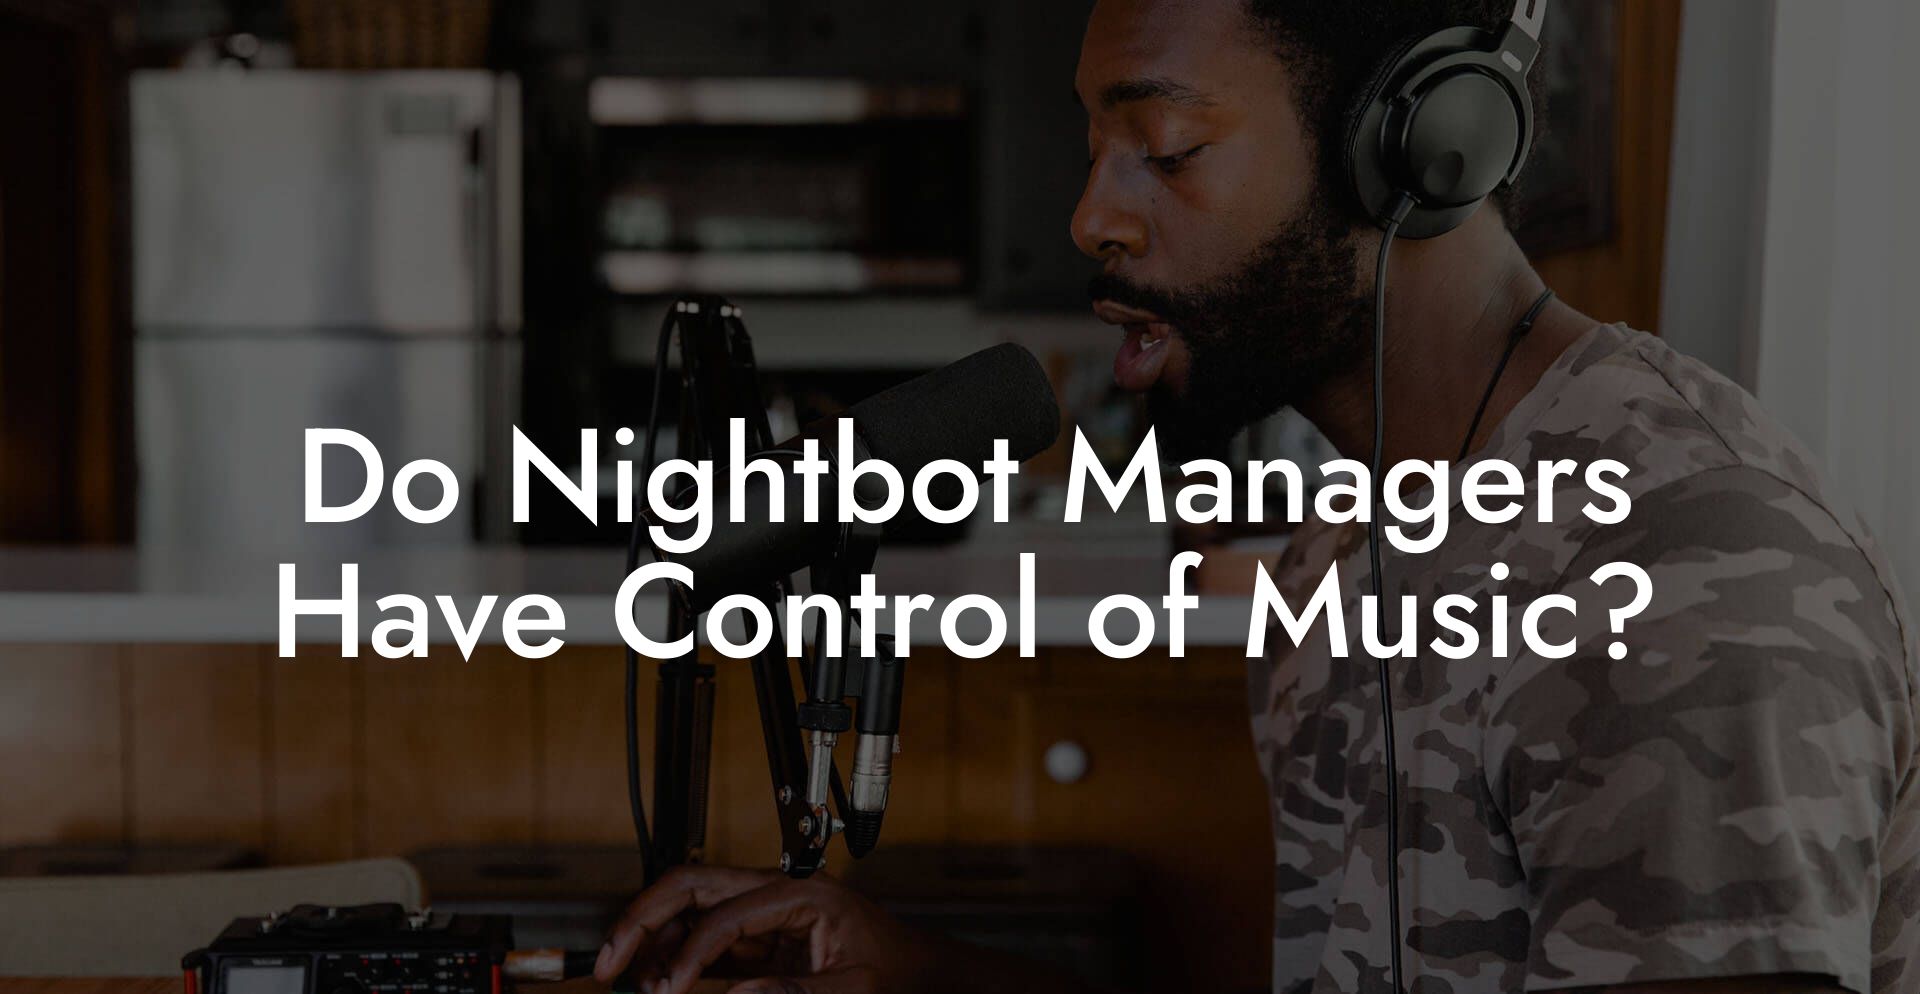 Do Nightbot Managers Have Control of Music?